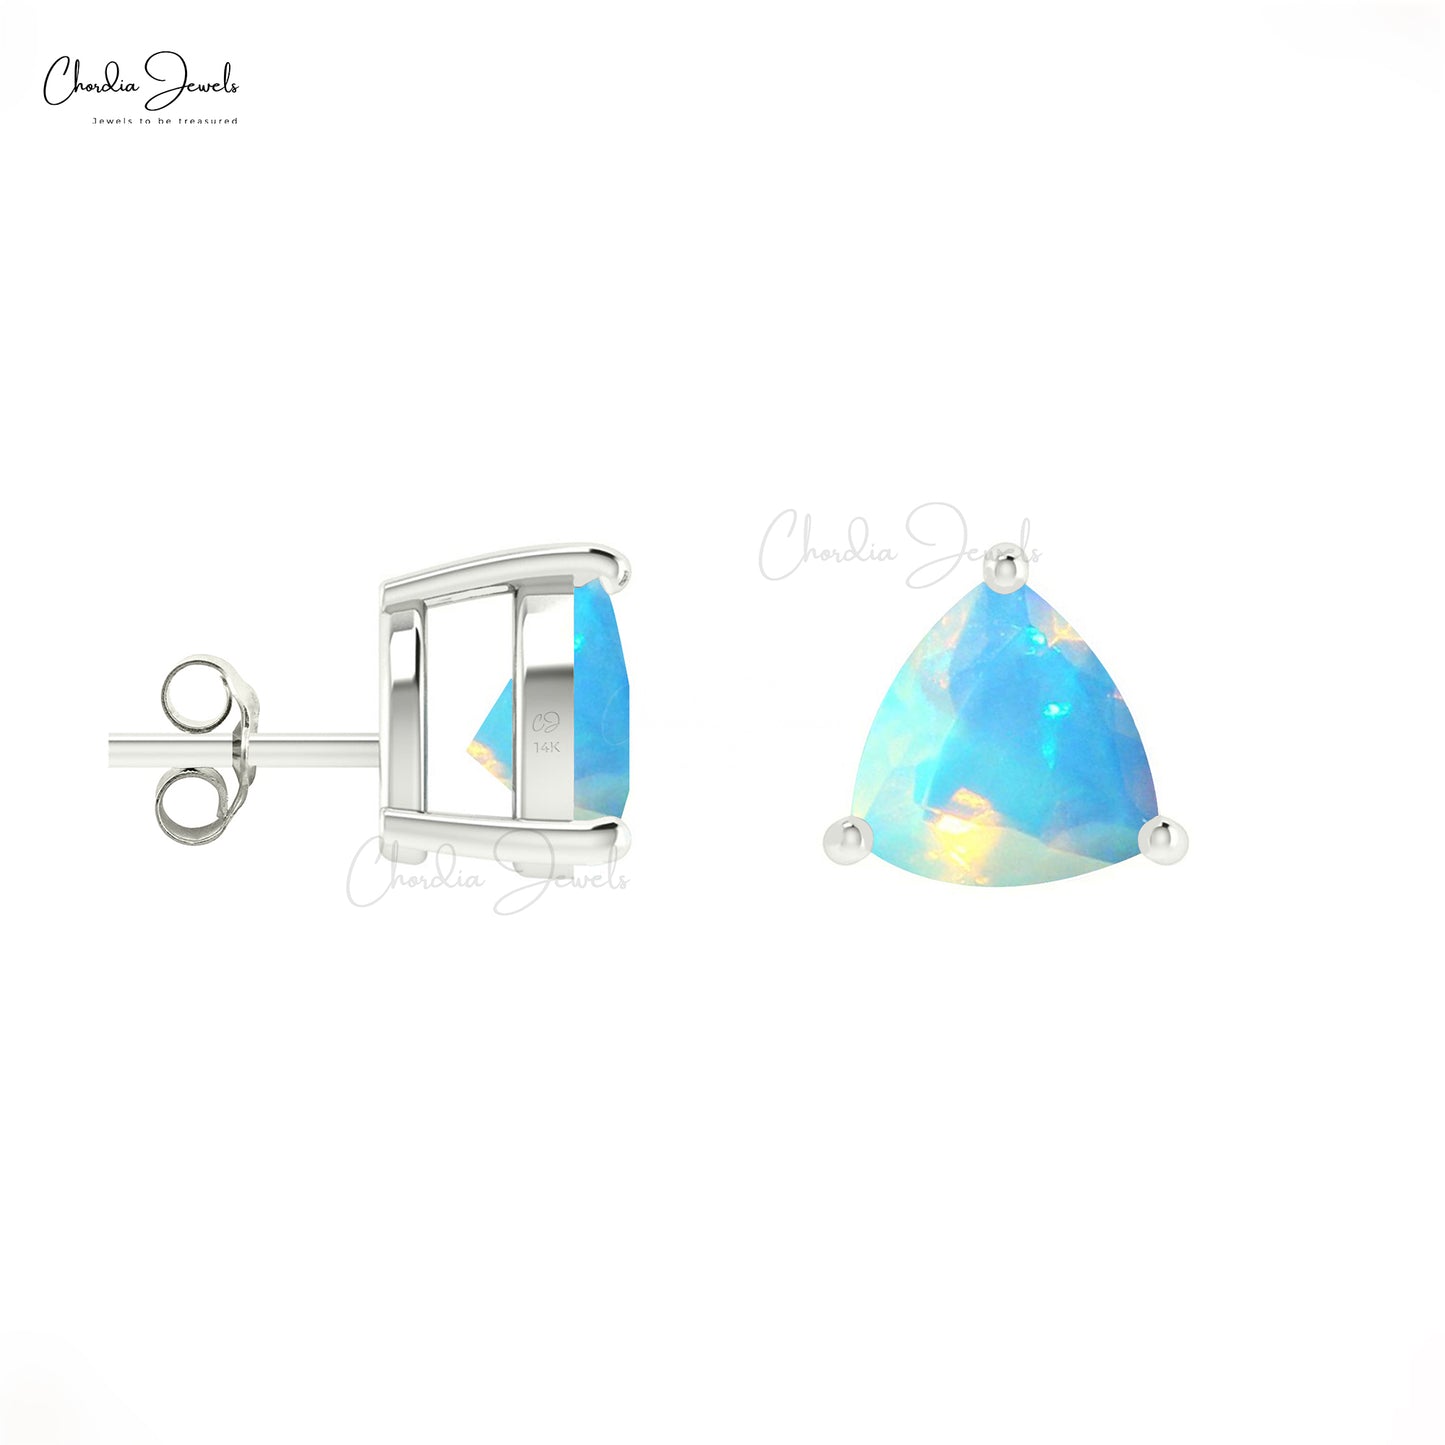 4mm Natural Trillion Cut Solitaire Opal Stud Earrings